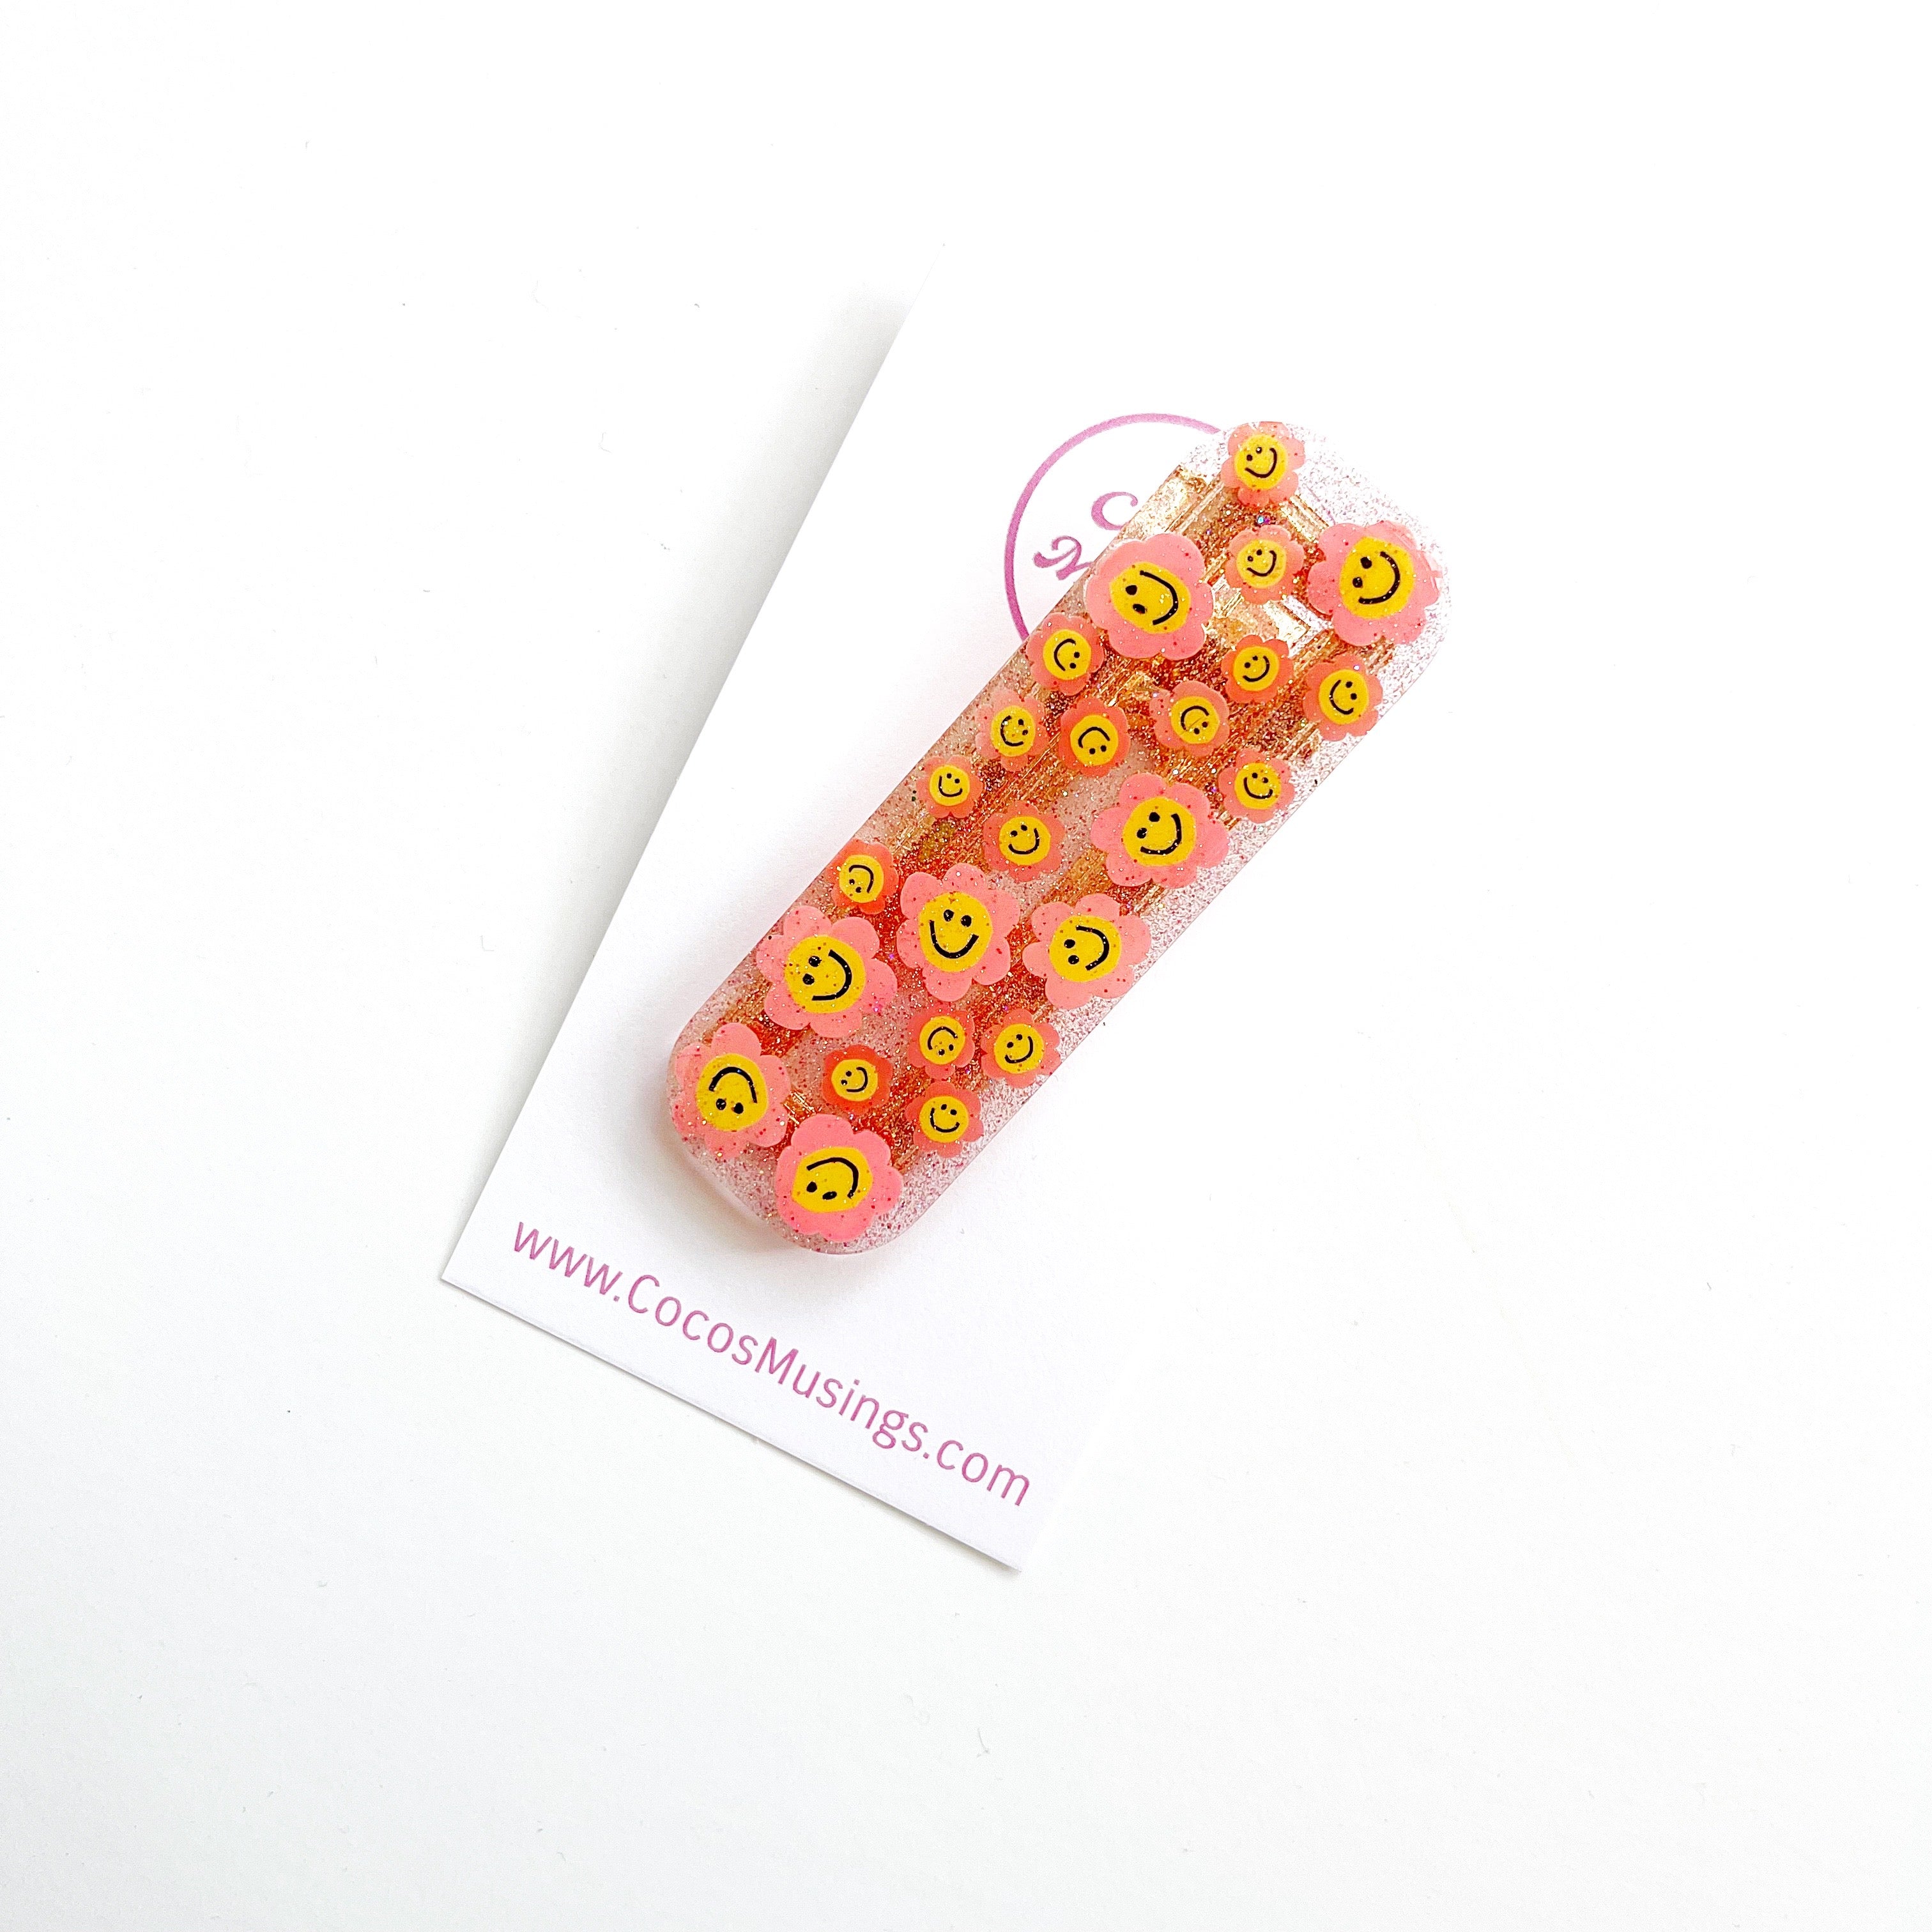 Image of clear clip with glitter and images of pink flowers with yellow smiley faces in the center on a rectangular hair clip.  